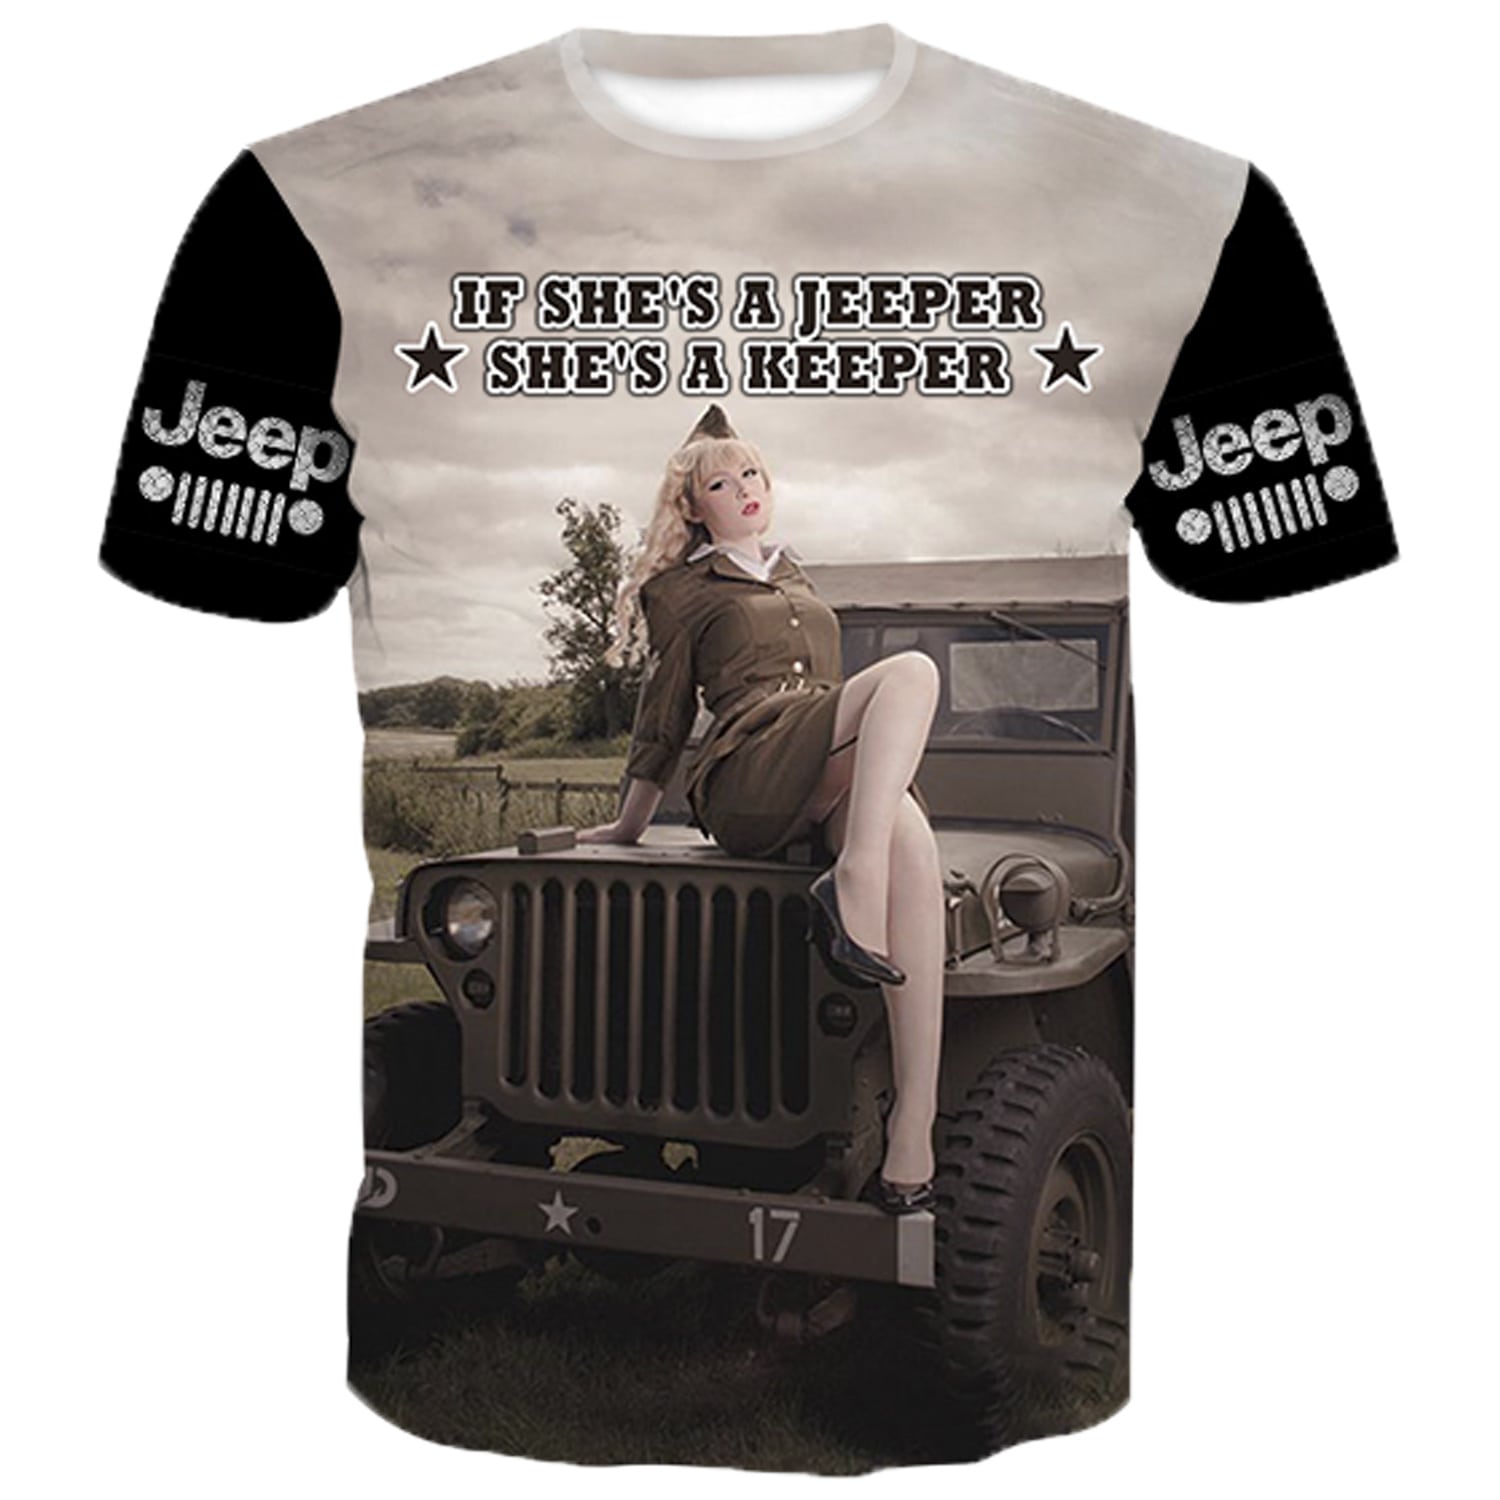 If She's a Jeeper She's a Keeper Shirt